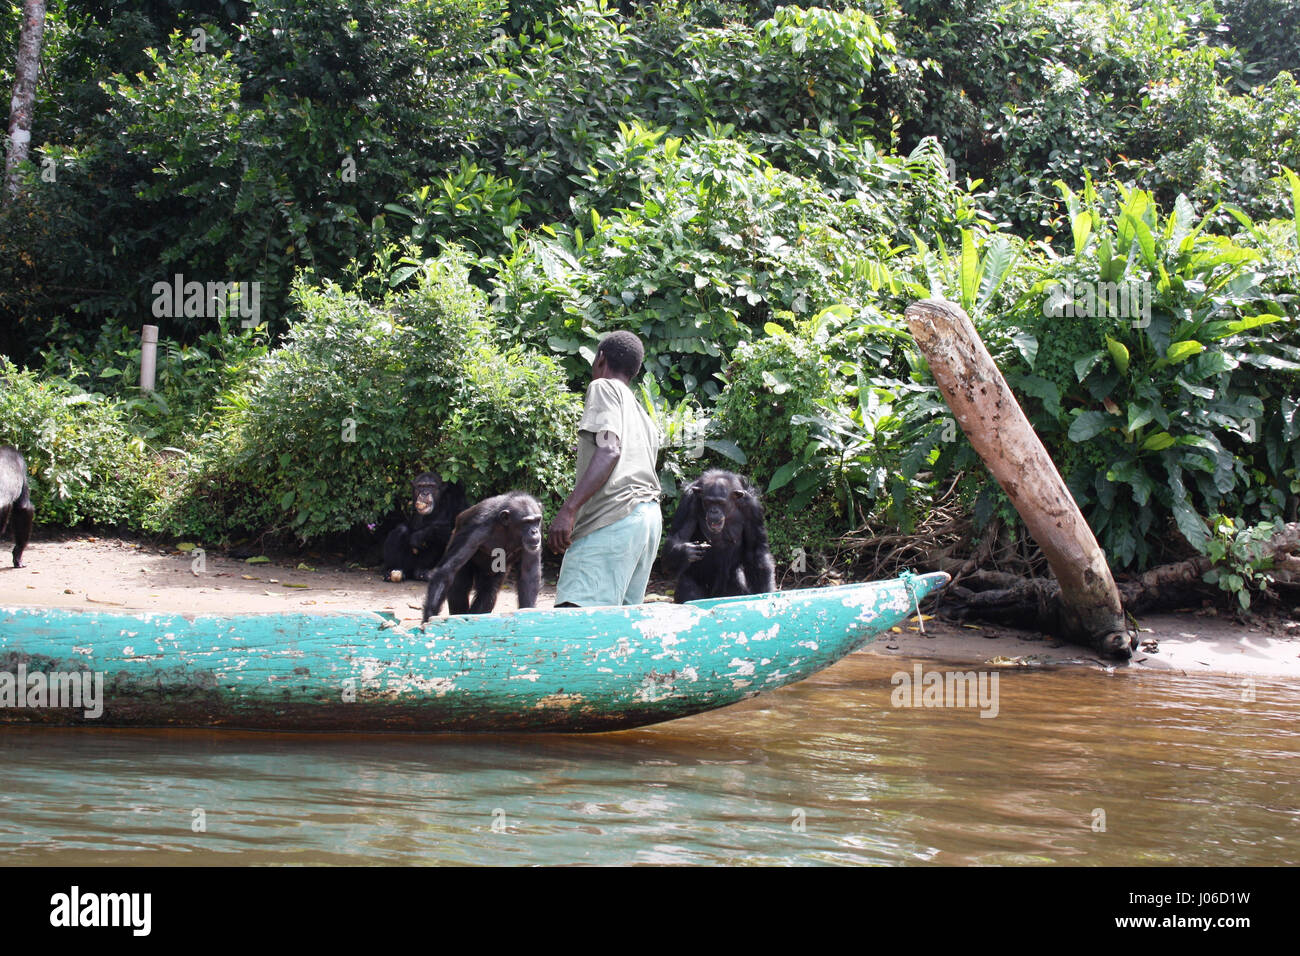 MONKEY ISLAND, LIBERIA: FEAST YOUR EYES on this paradise island where the only inhabitants are chimpanzees. Pictures show the charming chimps coming to greet their human friend as he brings them fresh food supplies from his canoe.  Other snaps show the great apes dipping their toes in the water, huddling around to catch up on the day’s events, while one solitary figure can be seen taking in a tree top view of the ocean while he finishes his lunch. Irish Youth worker Marie Power (27) was one of four lucky tourists on the hollowed out wooden canoe and was able to snap these incredible scenes of  Stock Photo